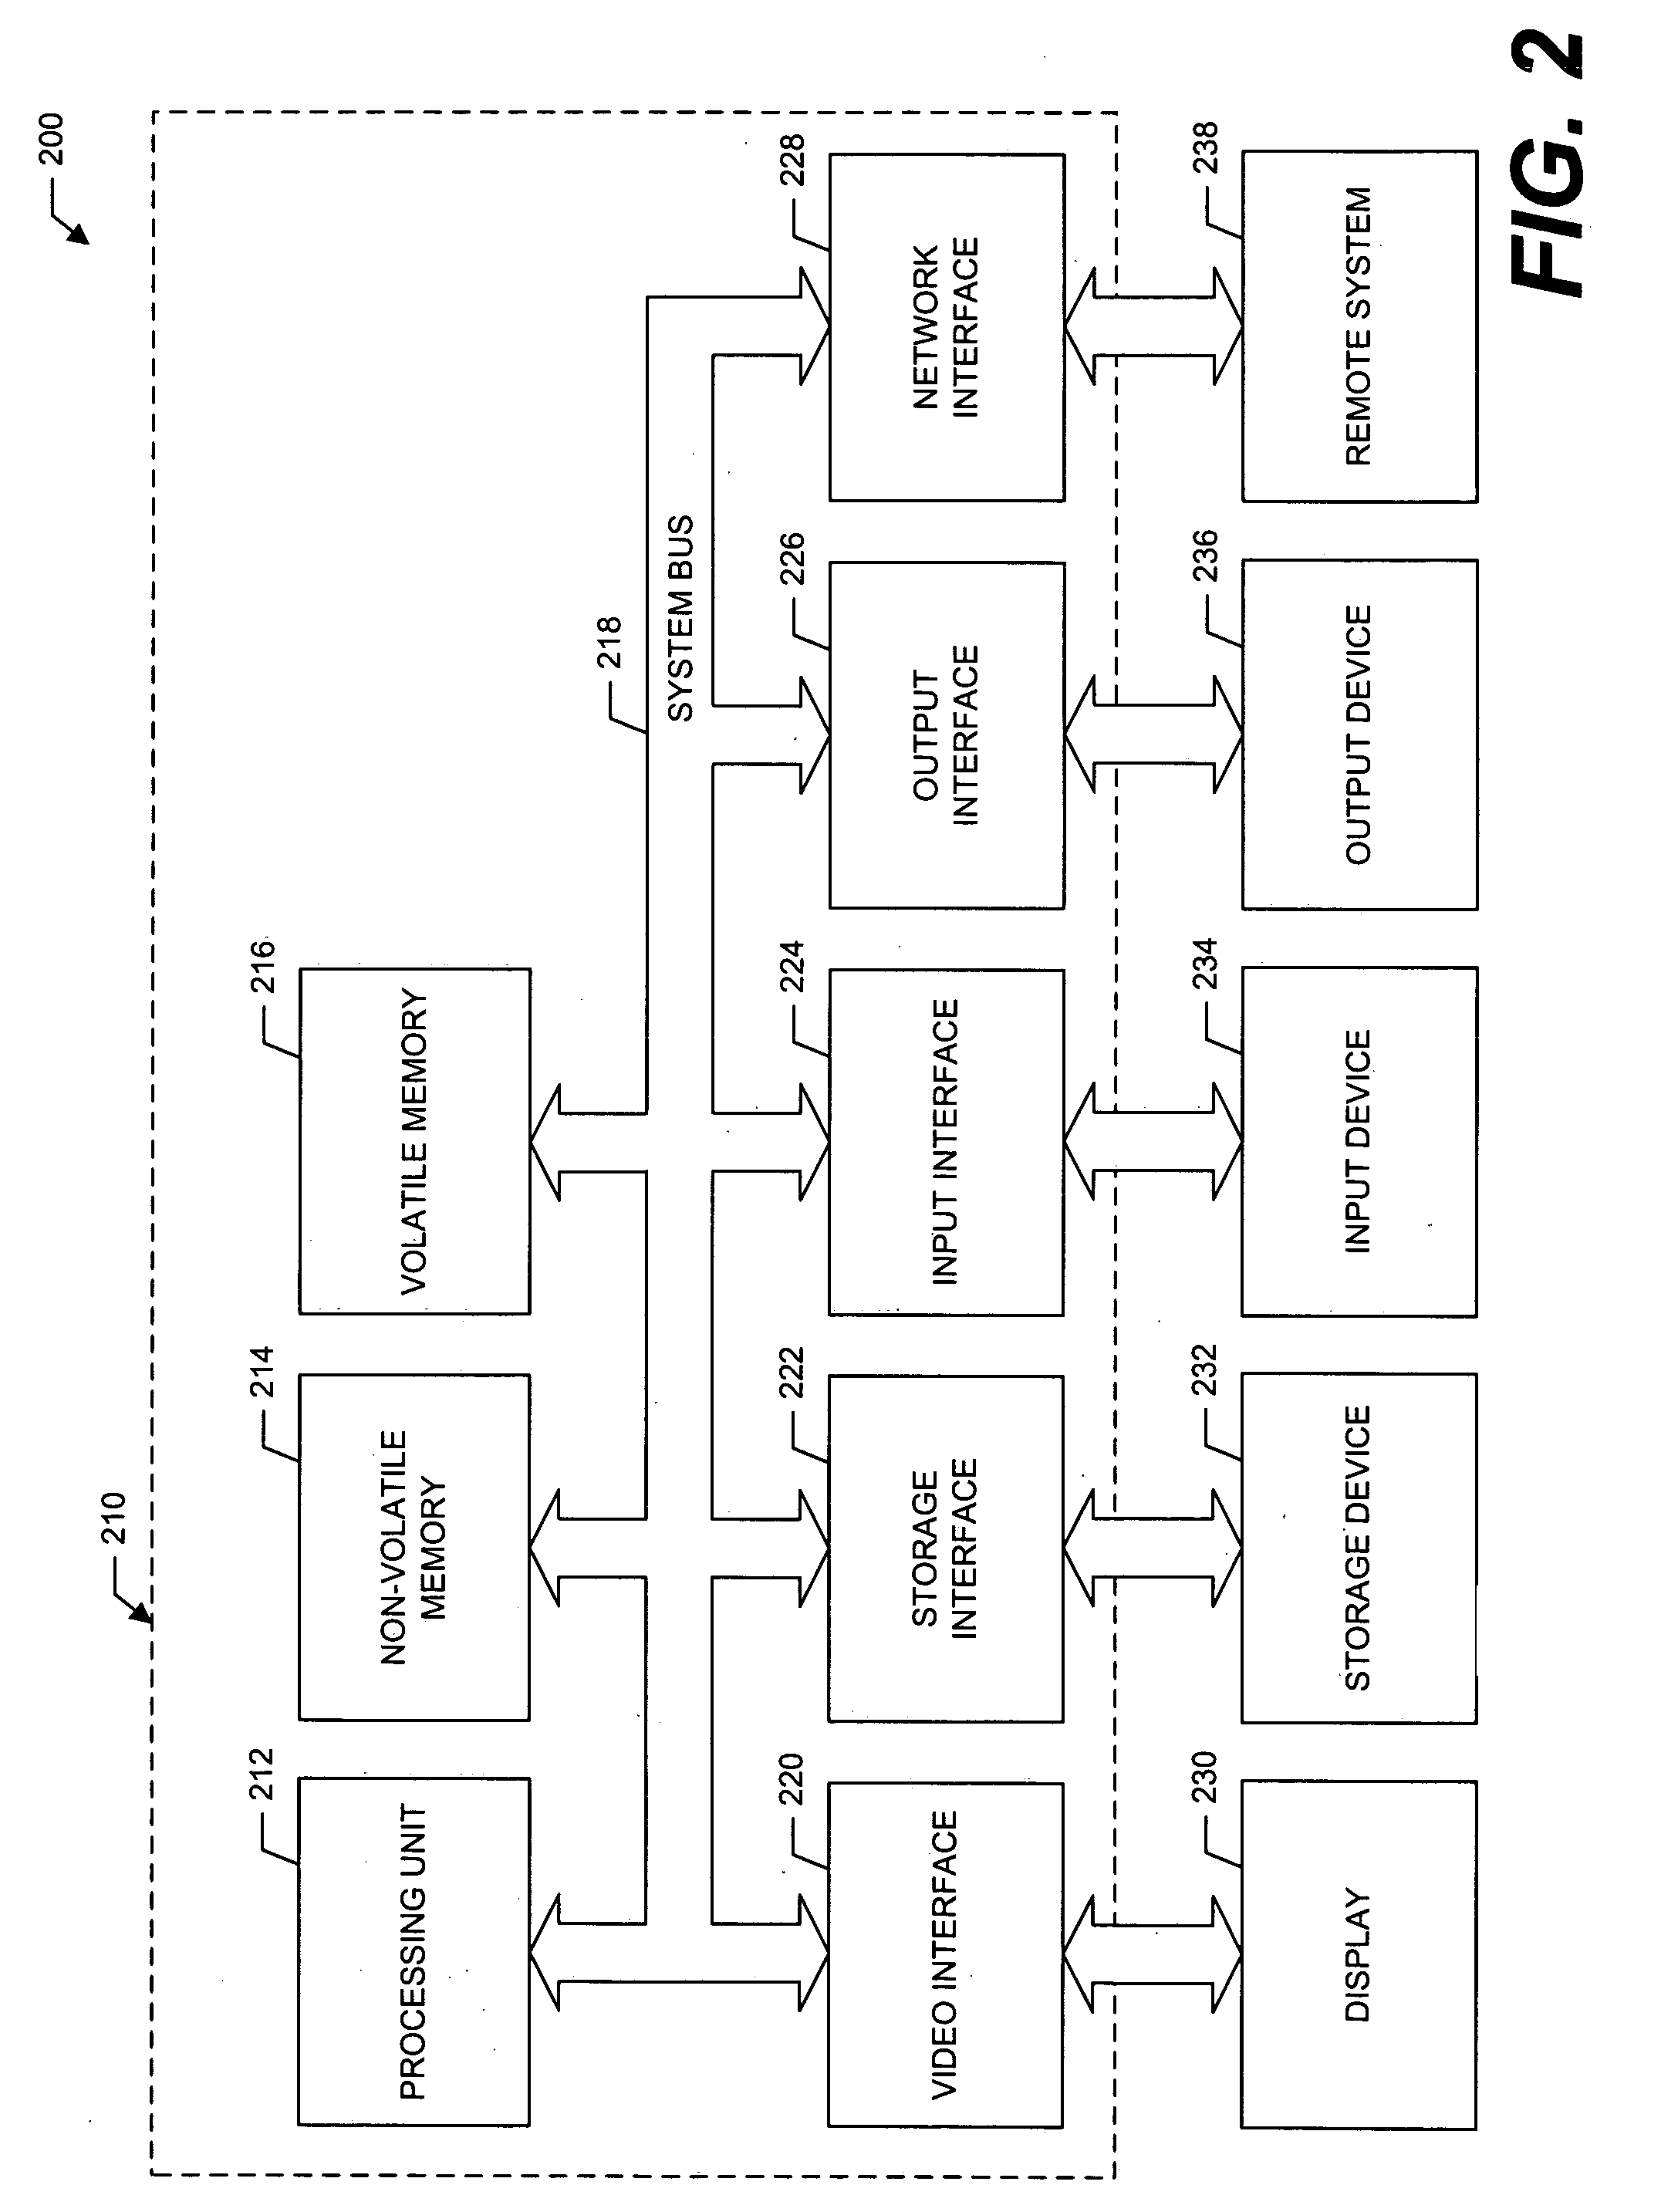 System and methods for encrypting data utilizing one-time pad key